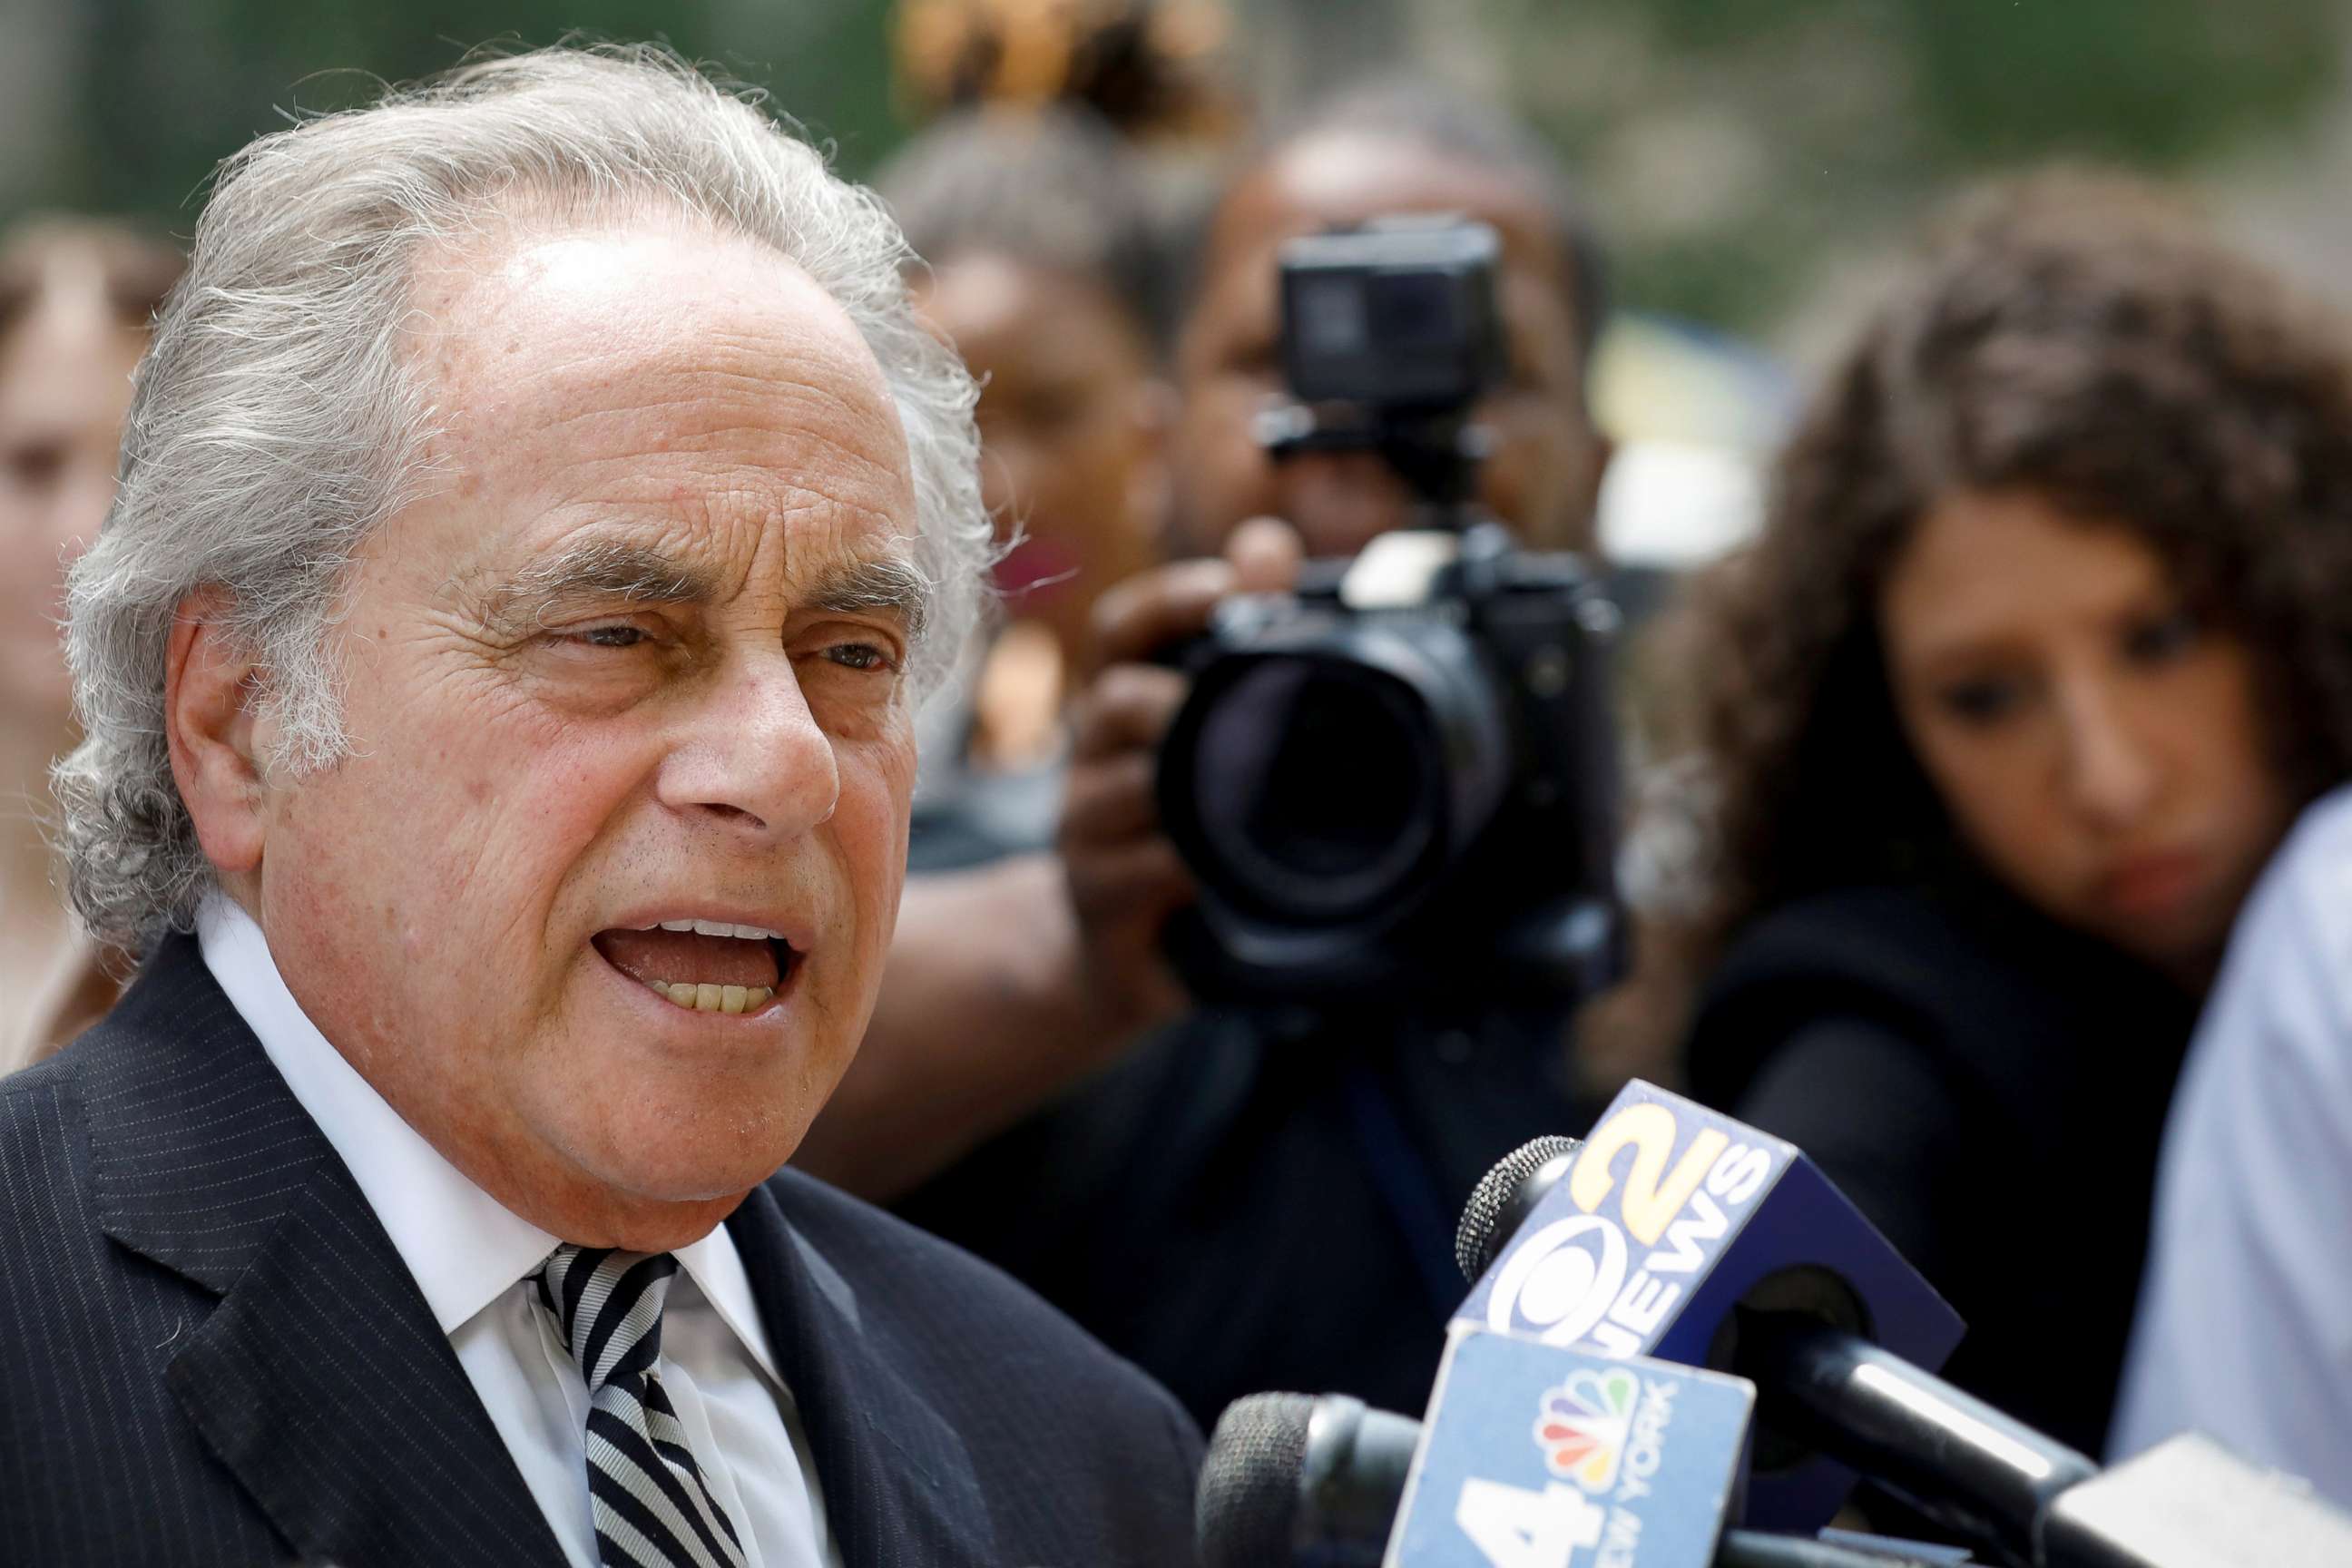 PHOTO: Benjamin Brafman, Lawyer for Film producer Harvey Weinstein, speaks to the press following a meeting at the Manhattan Criminal Court in New York, May 29, 2018.